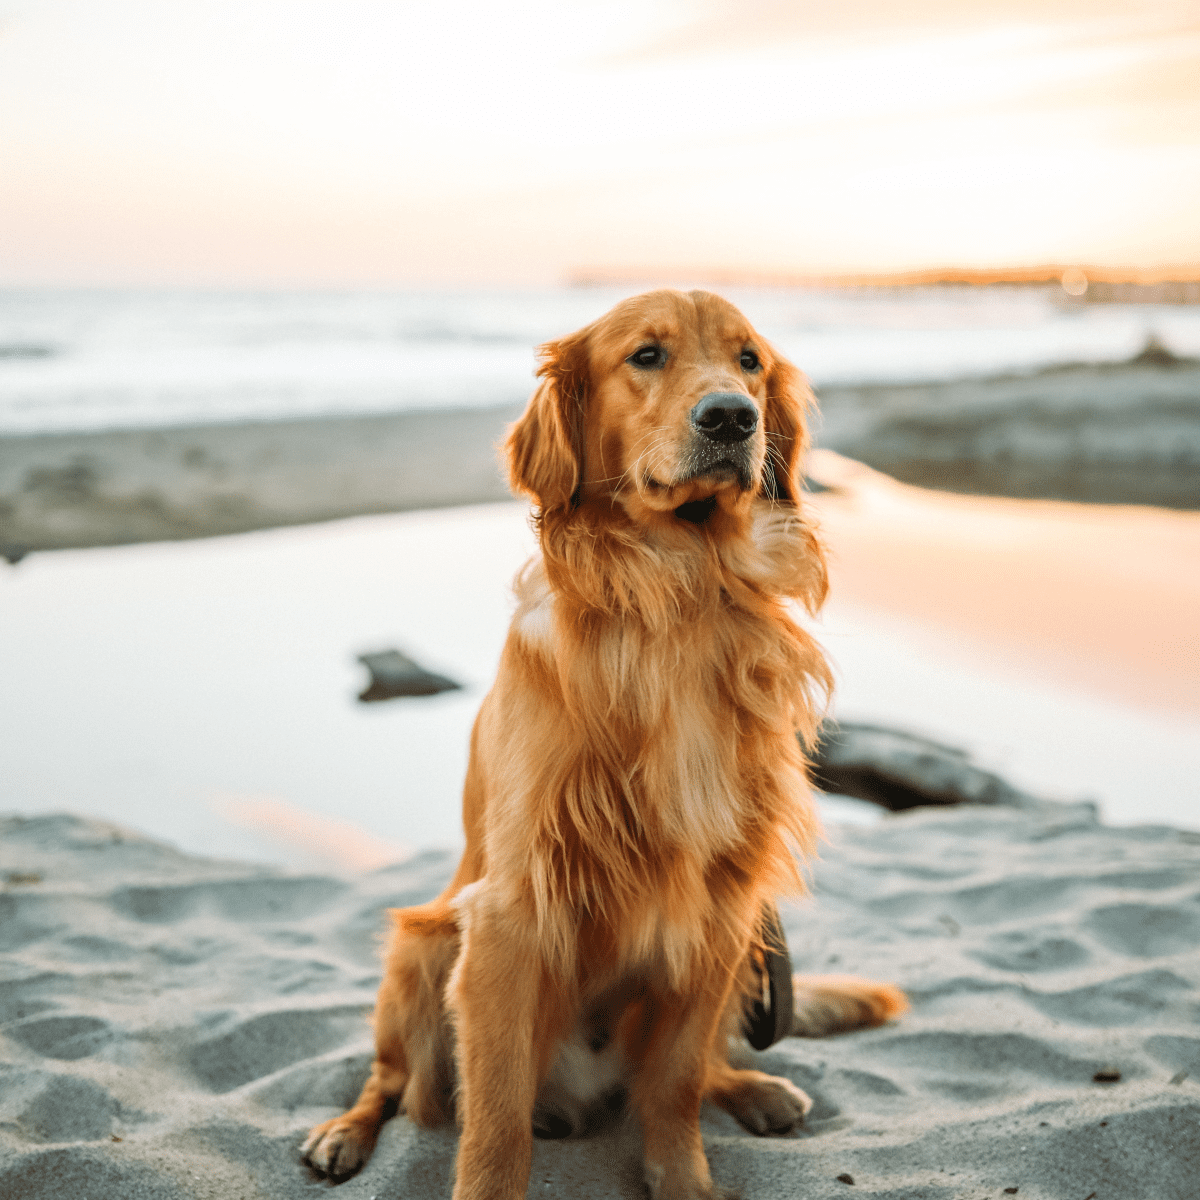 can I keep my golden retriever outside? 2